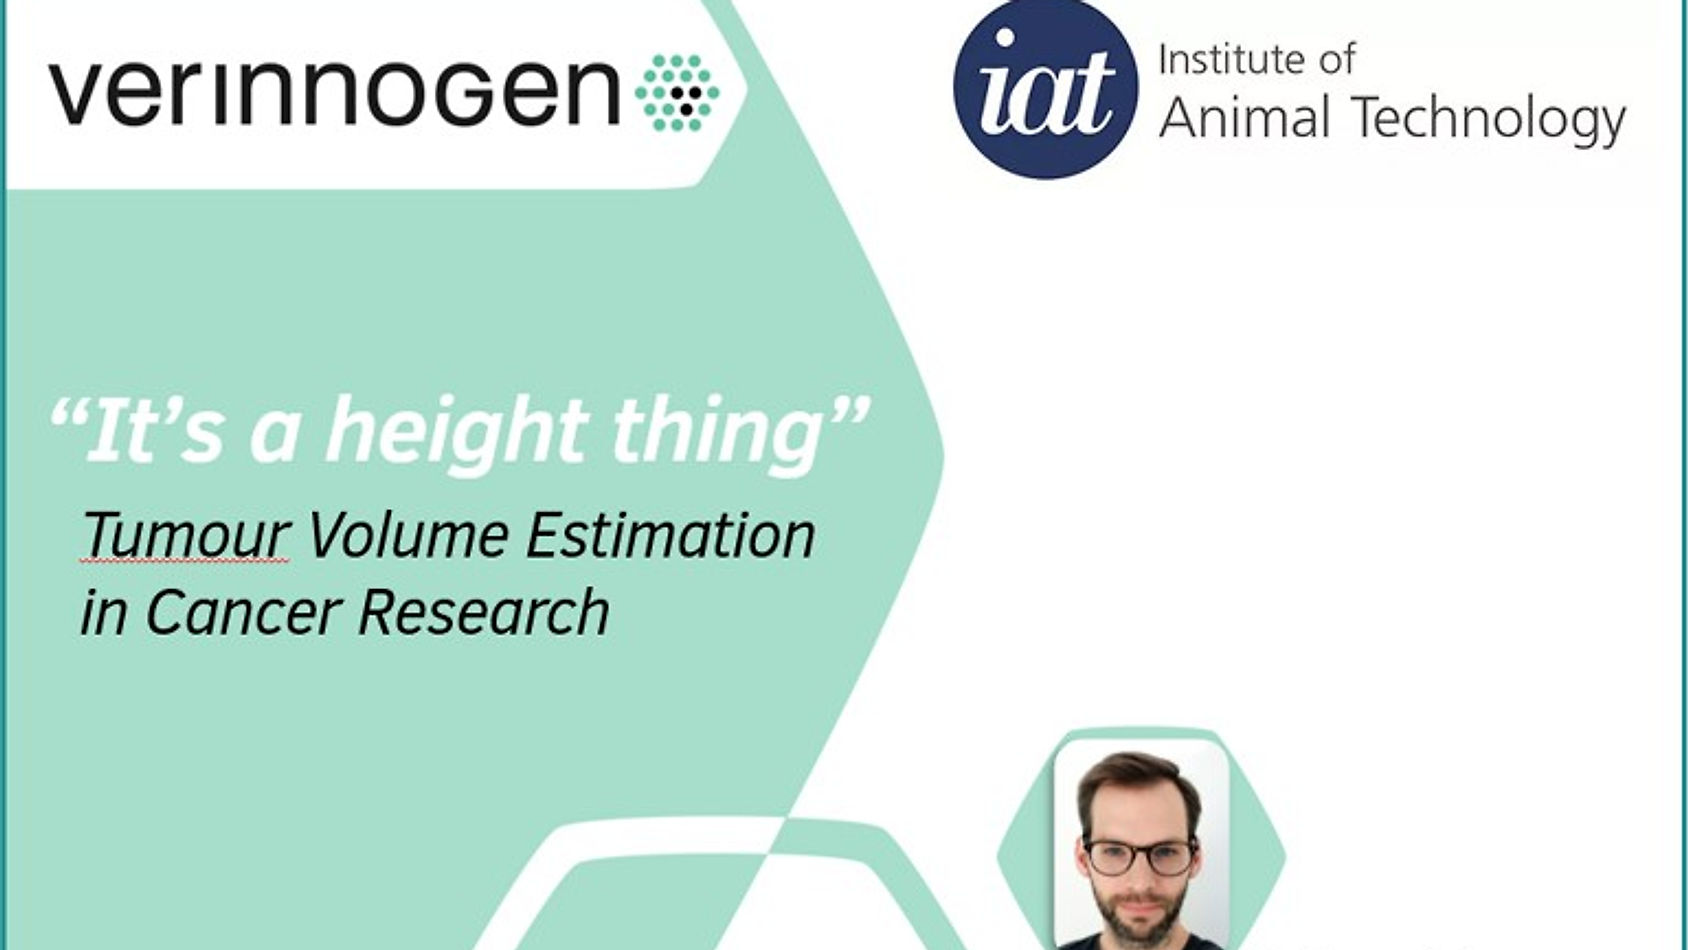 "It's a height thing" - Tumour Volume Estimation in Cancer Research